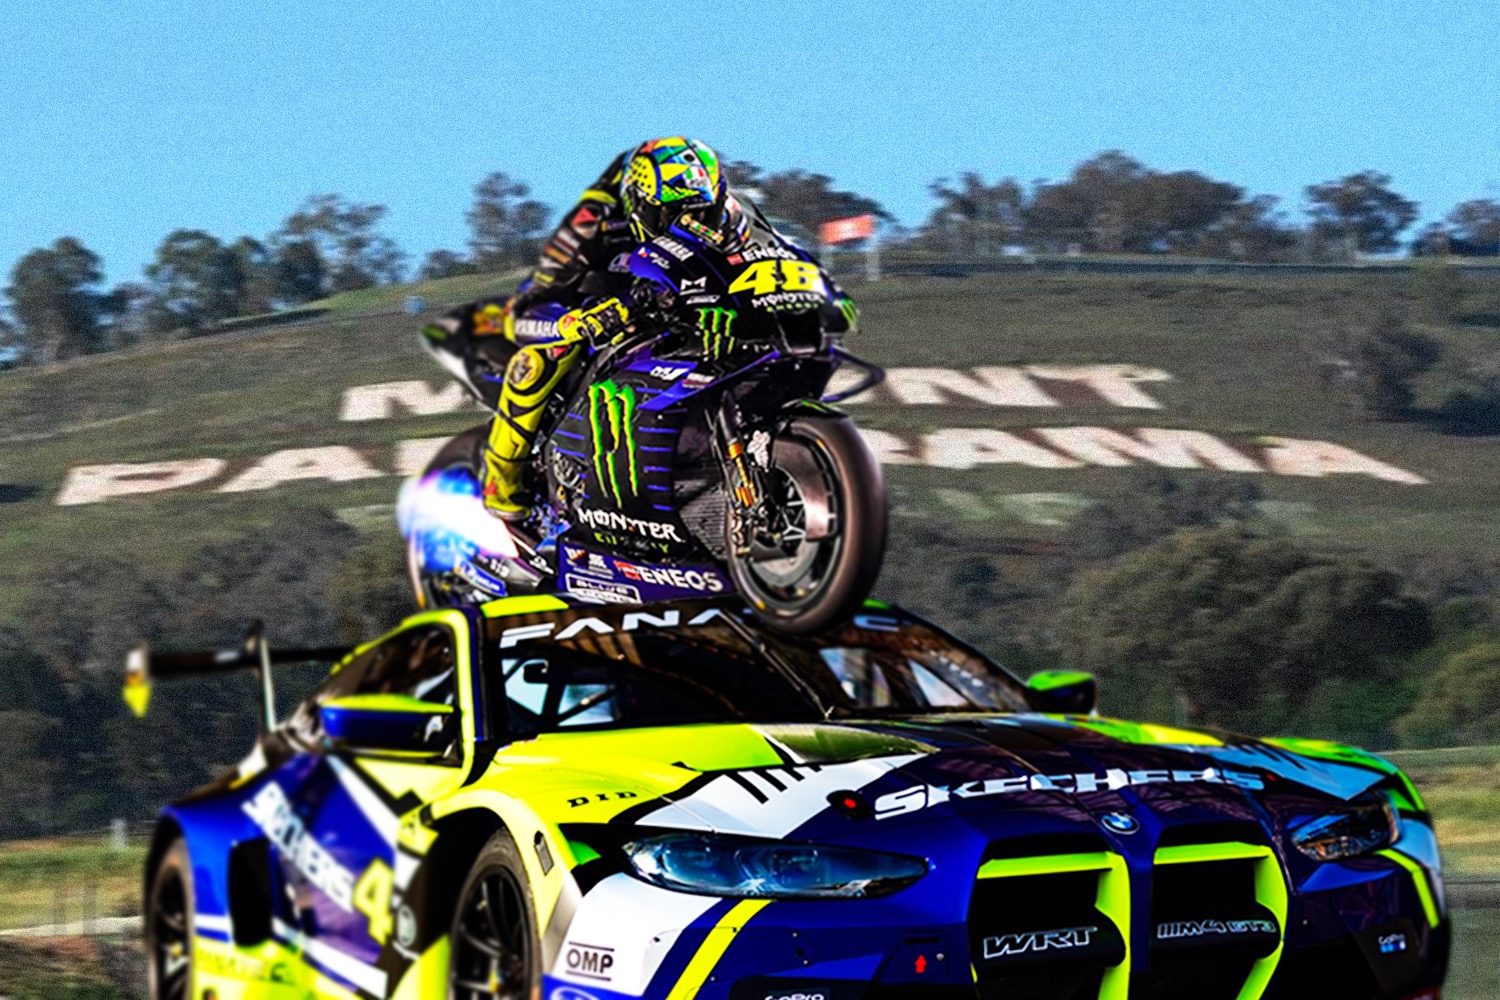 Valentino Rossi Swaps Bikes For Supercars, Will Make Bathurst Debut This Weekend